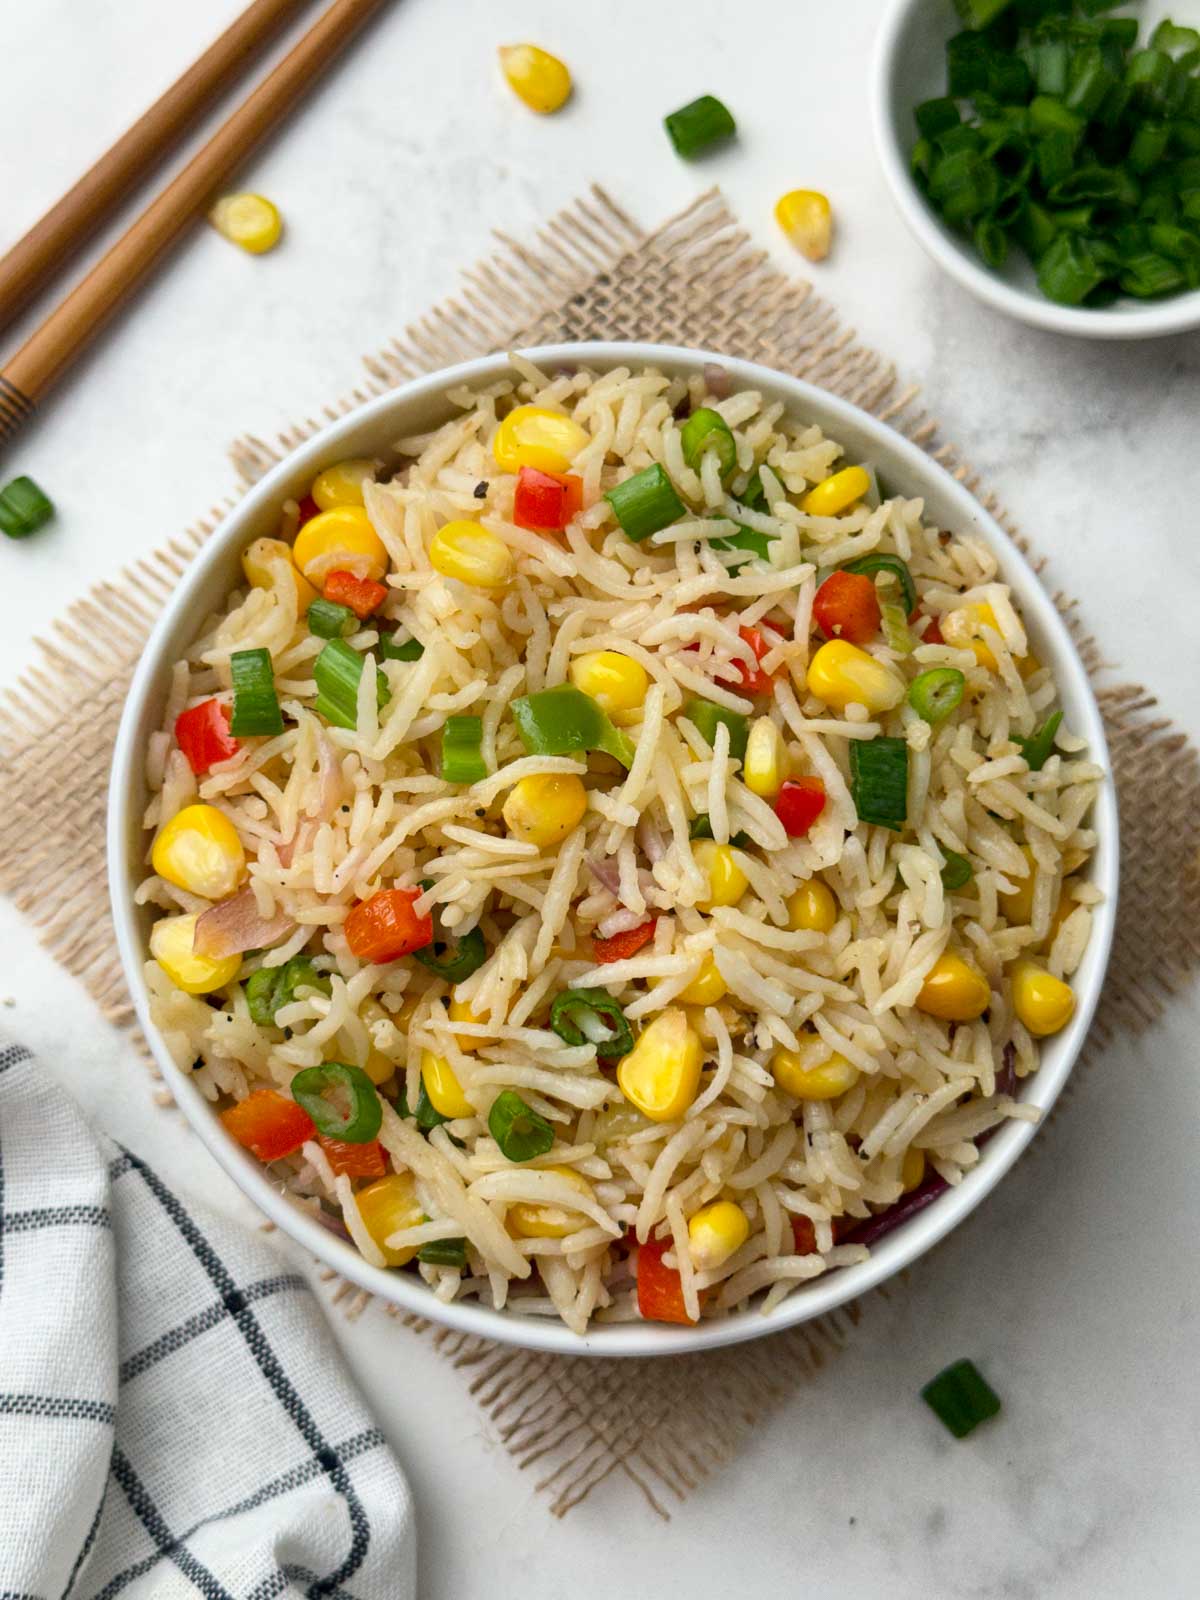 sweet corn fried rice recipe served in a bowl with chop sticks and green onions on the side